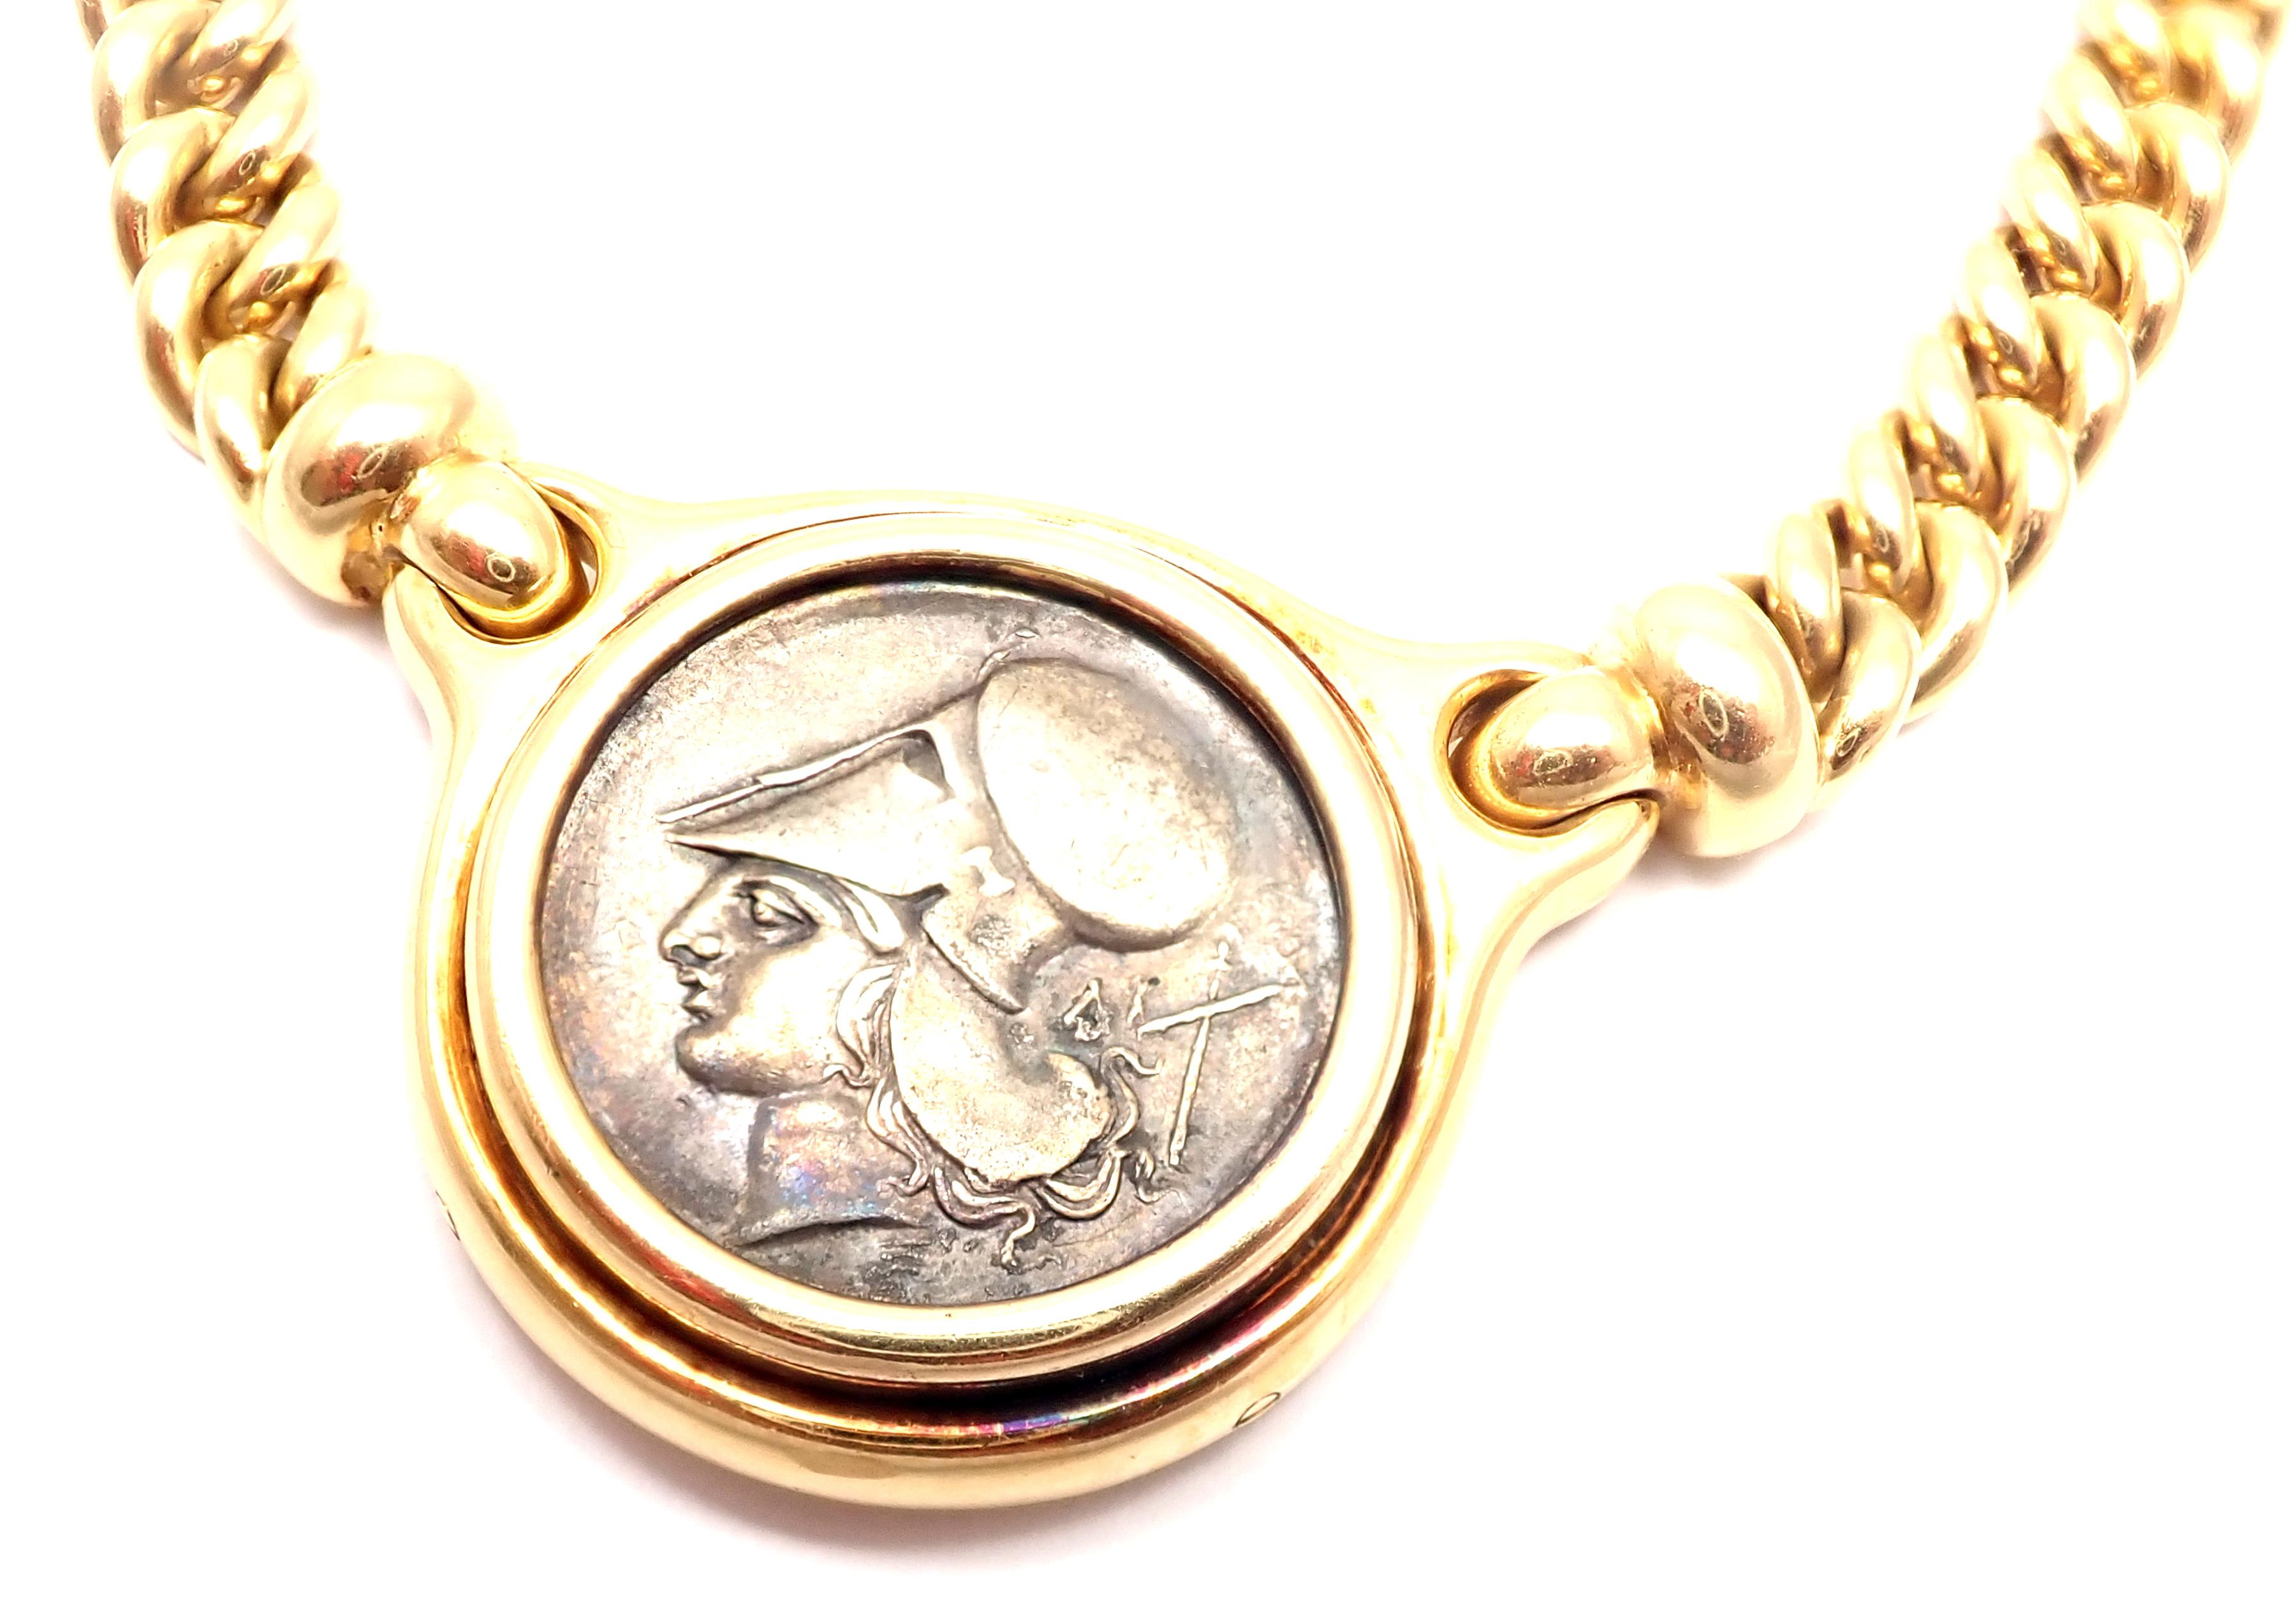 18k yellow gold ancient silver coin, link chain necklace by Bulgari.
Measurements: 
Length: 15.5